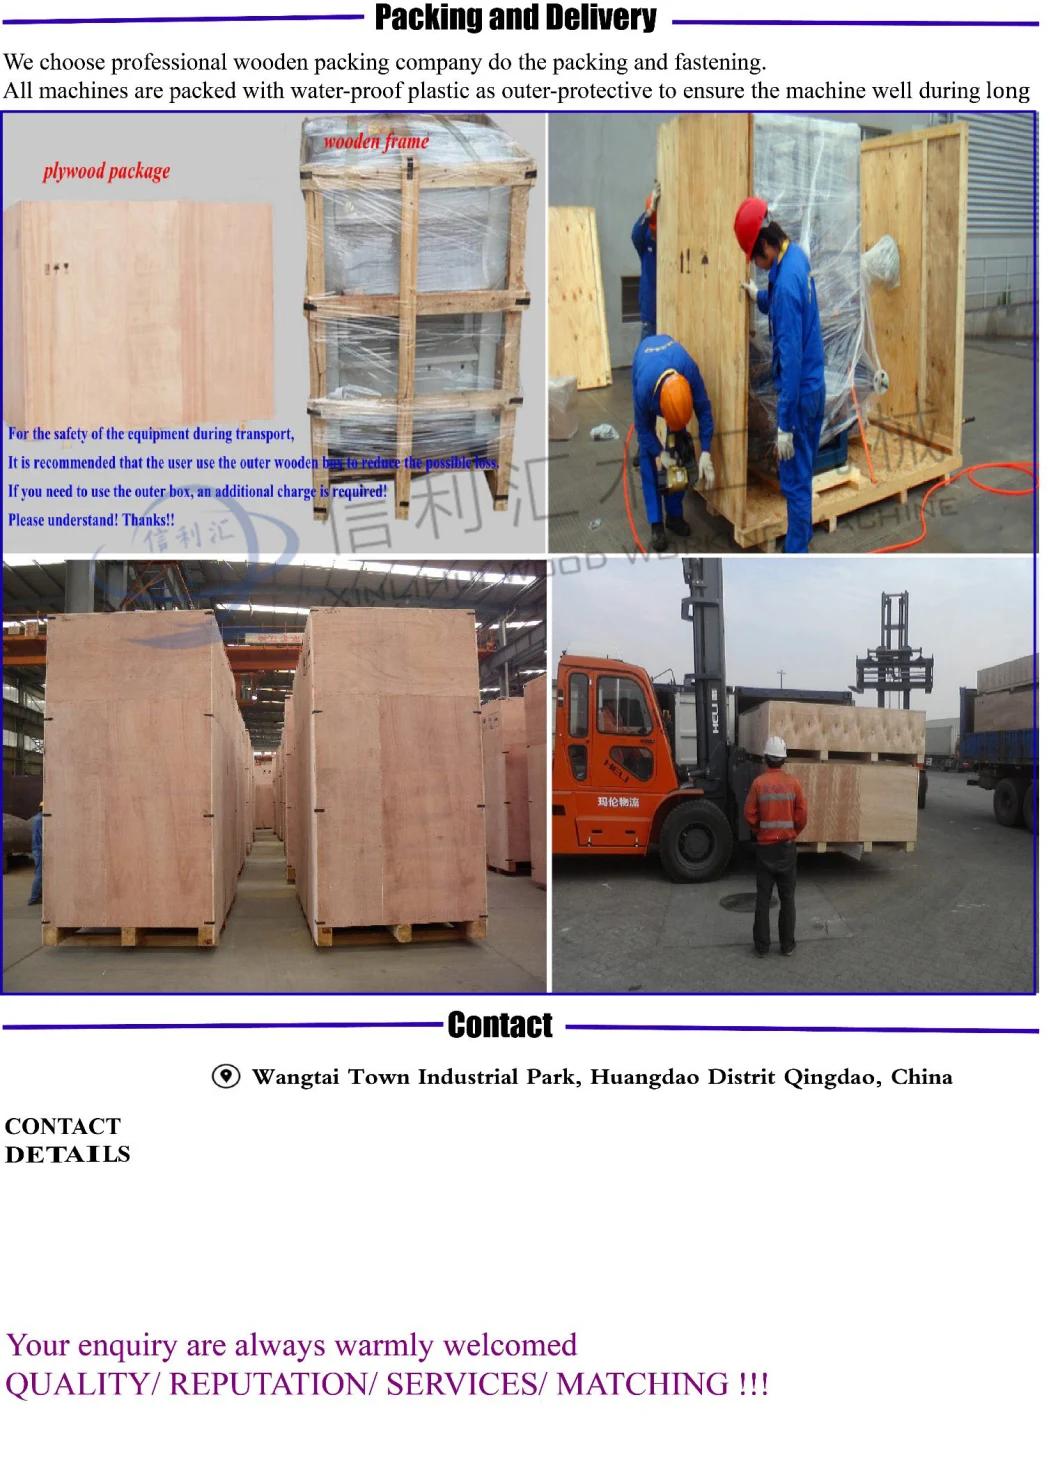 Edge Cutting Thick Saw, Cutting Saw, Divided Into Two, Multi-Blade Saw, Small Round Saw, Multi-Blade Saw Hardwood